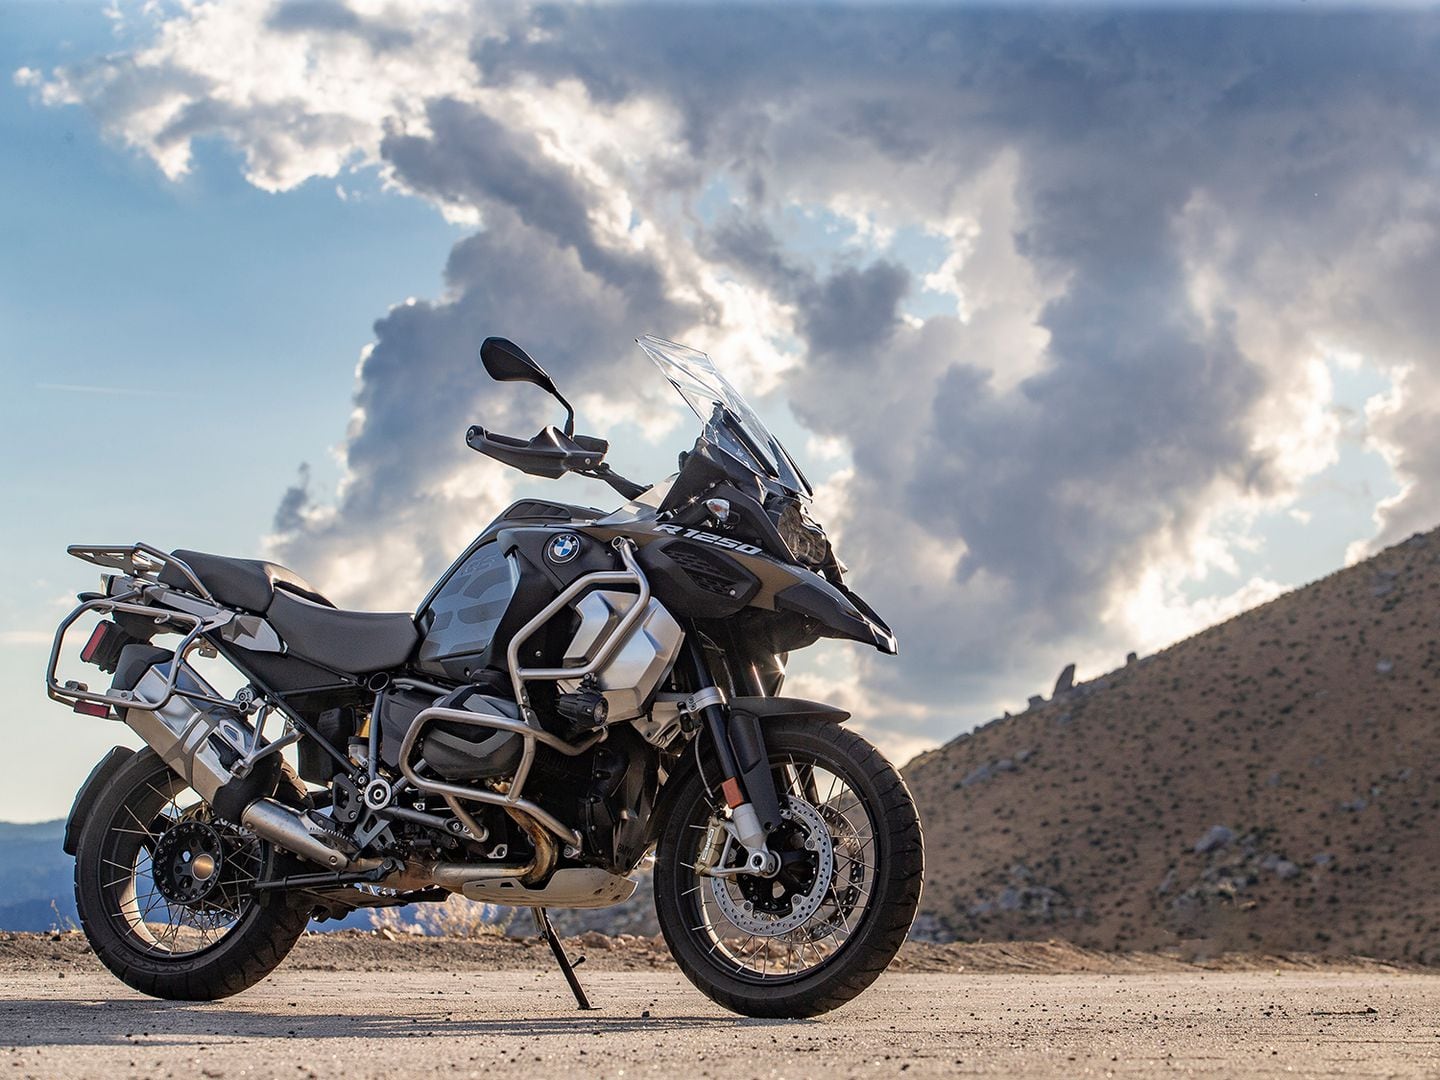 2019 Honda Gold Wing Tour vs. BMW R 1250 GS Adventure | Cycle World